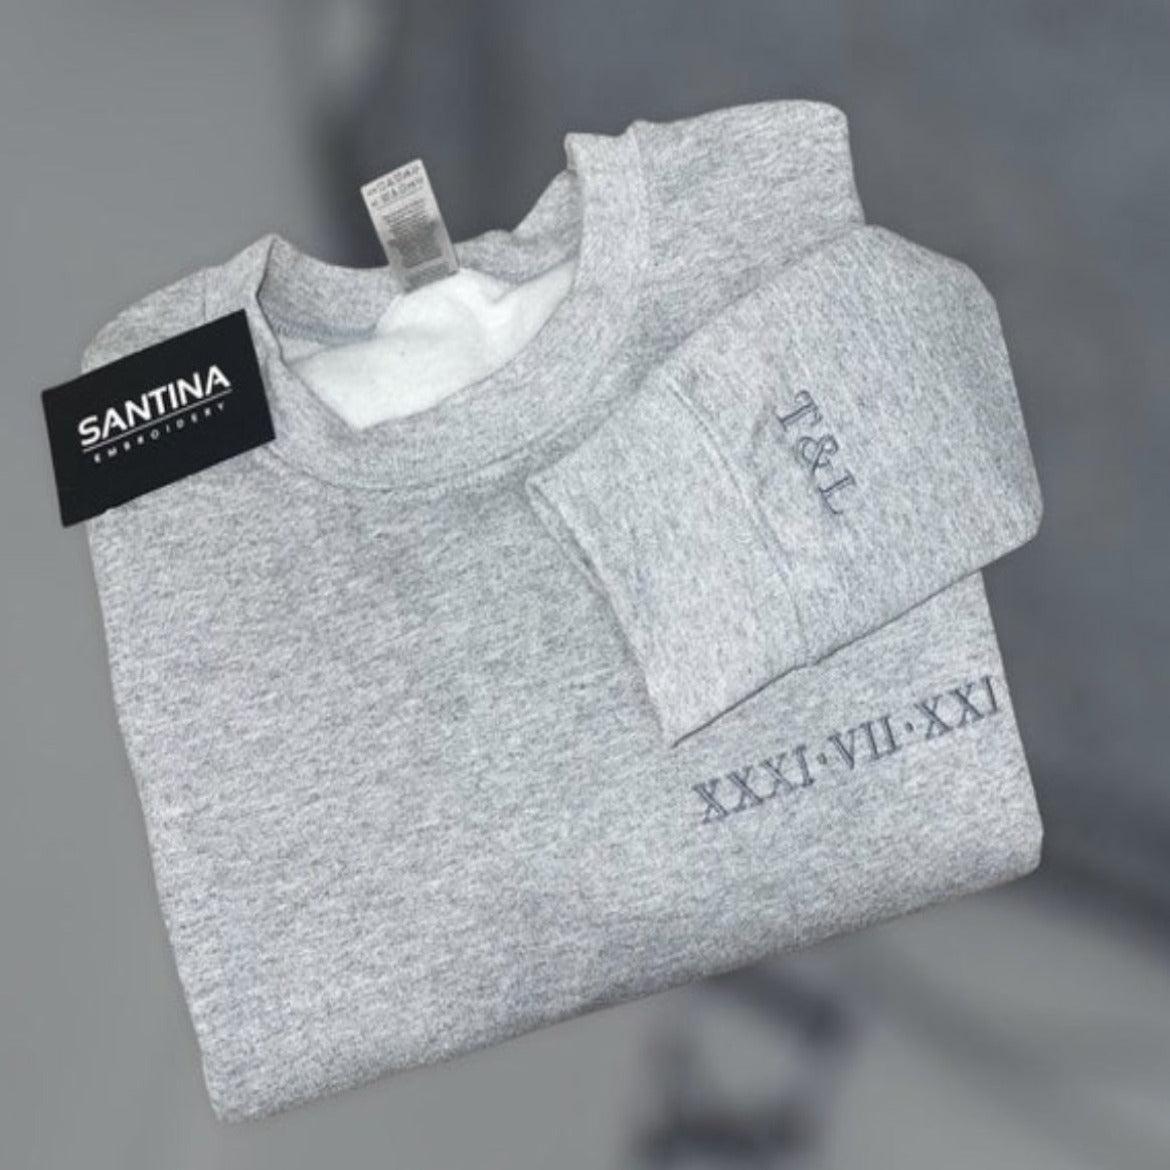 Unique Roman numeral sweatshirt with custom embroidery and gray fabric.